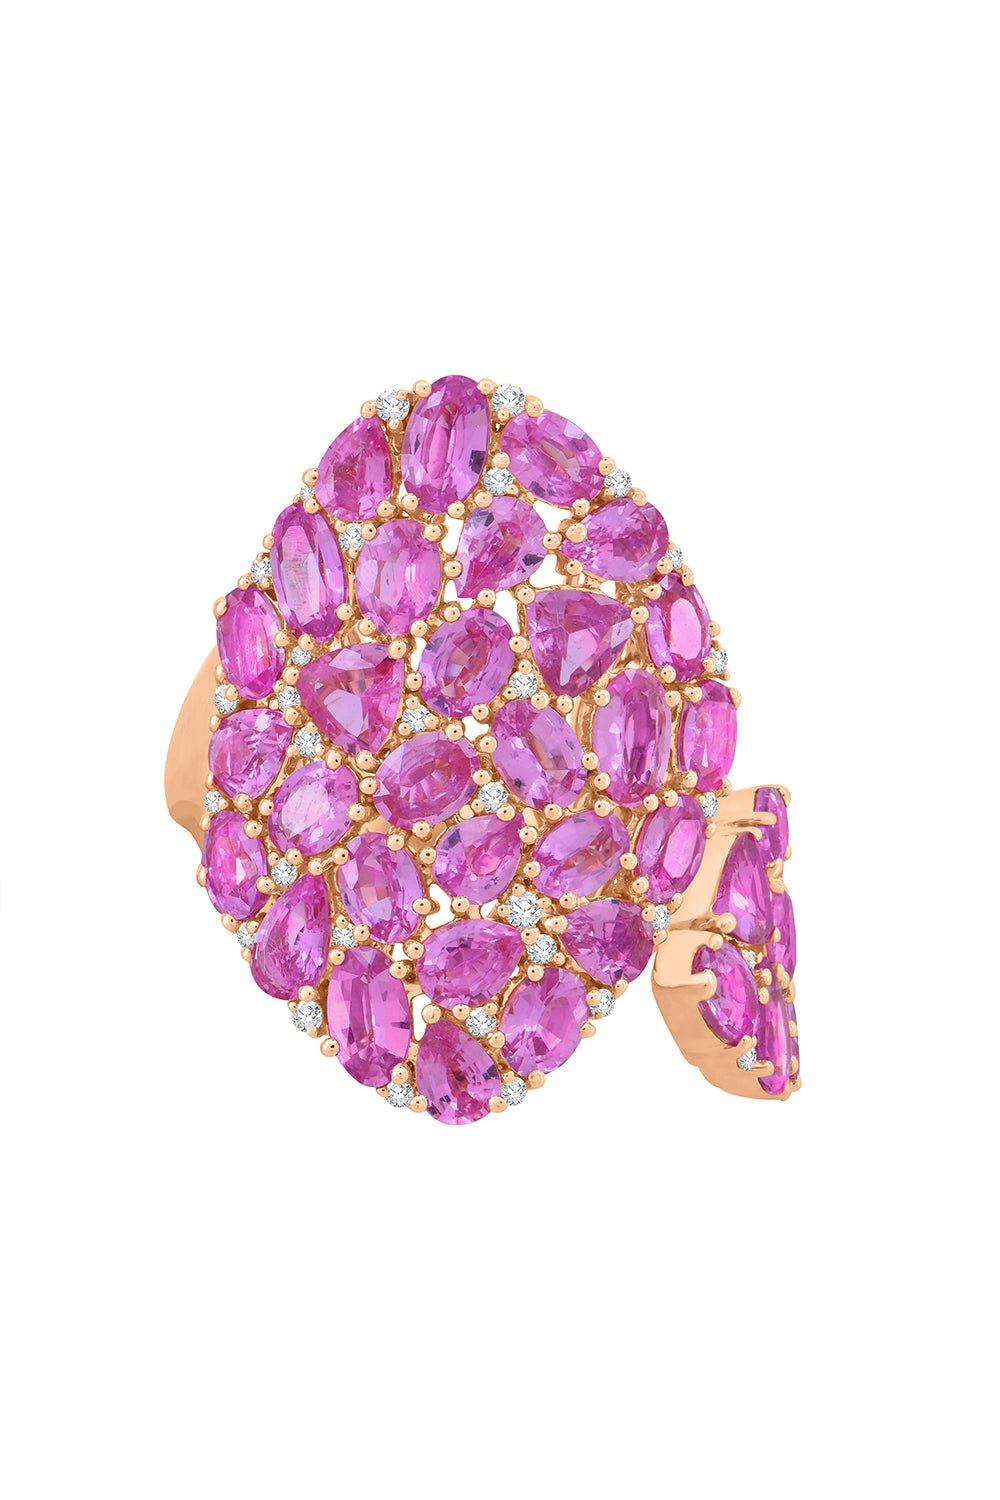 SUTRA-Pink Sapphire Ring-RSEGLD